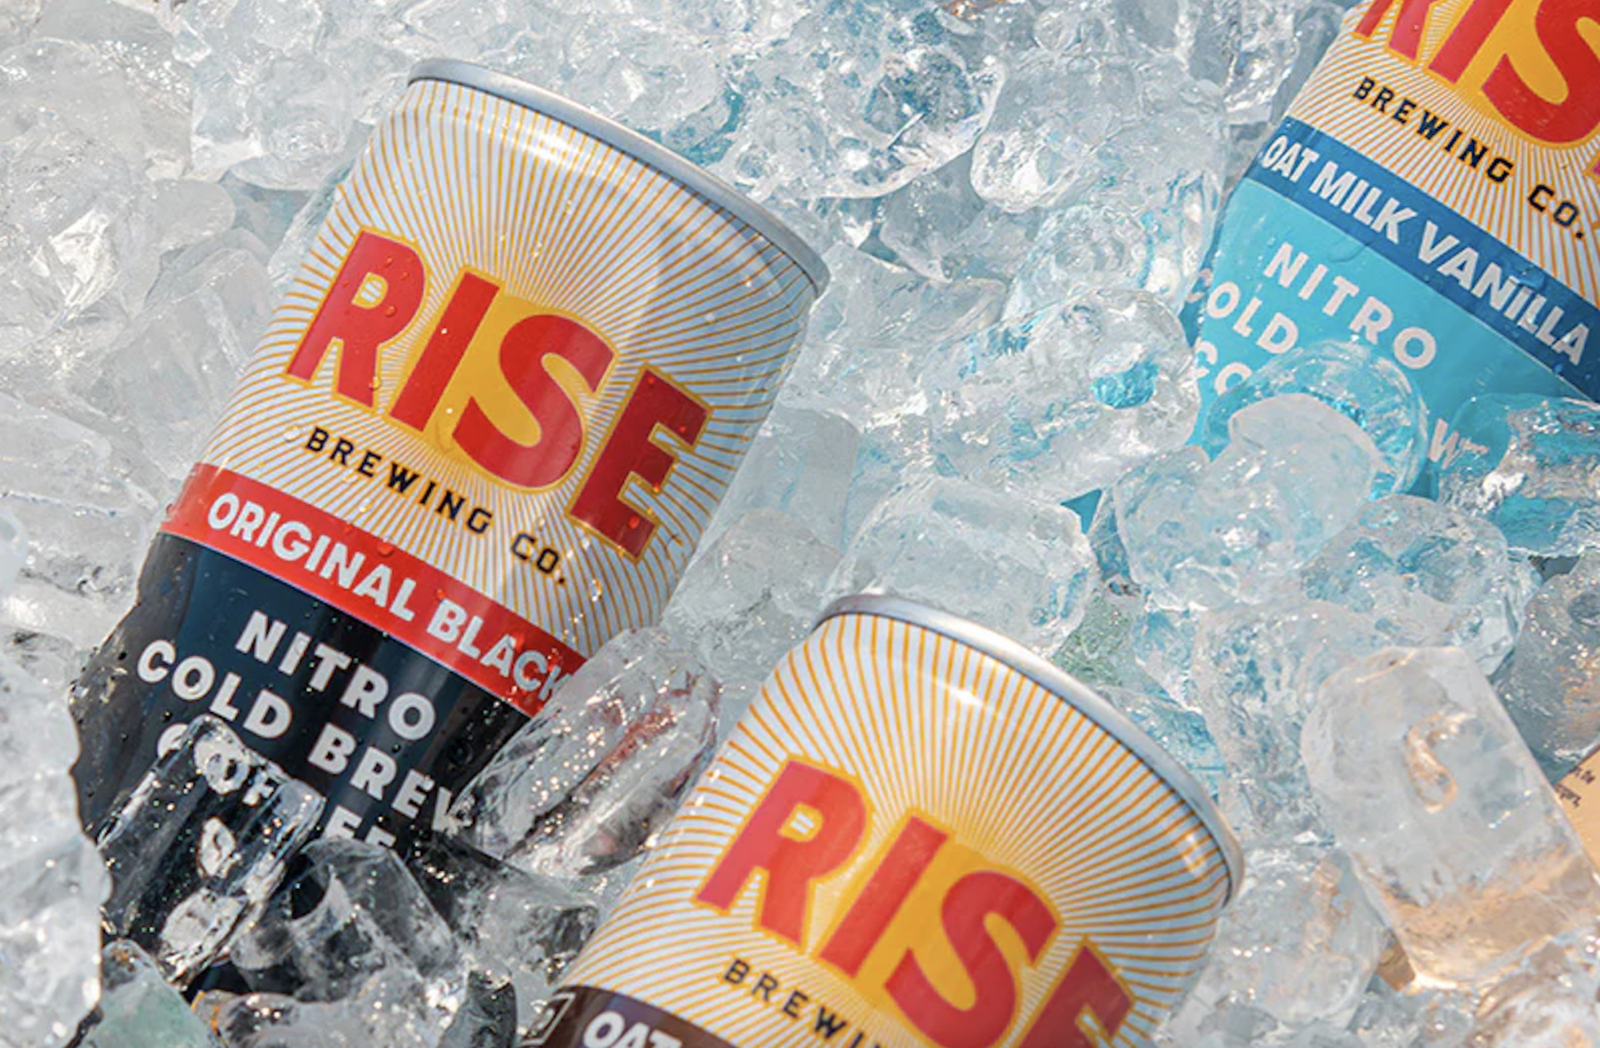 Cans of Rise Brewing coffee in ice